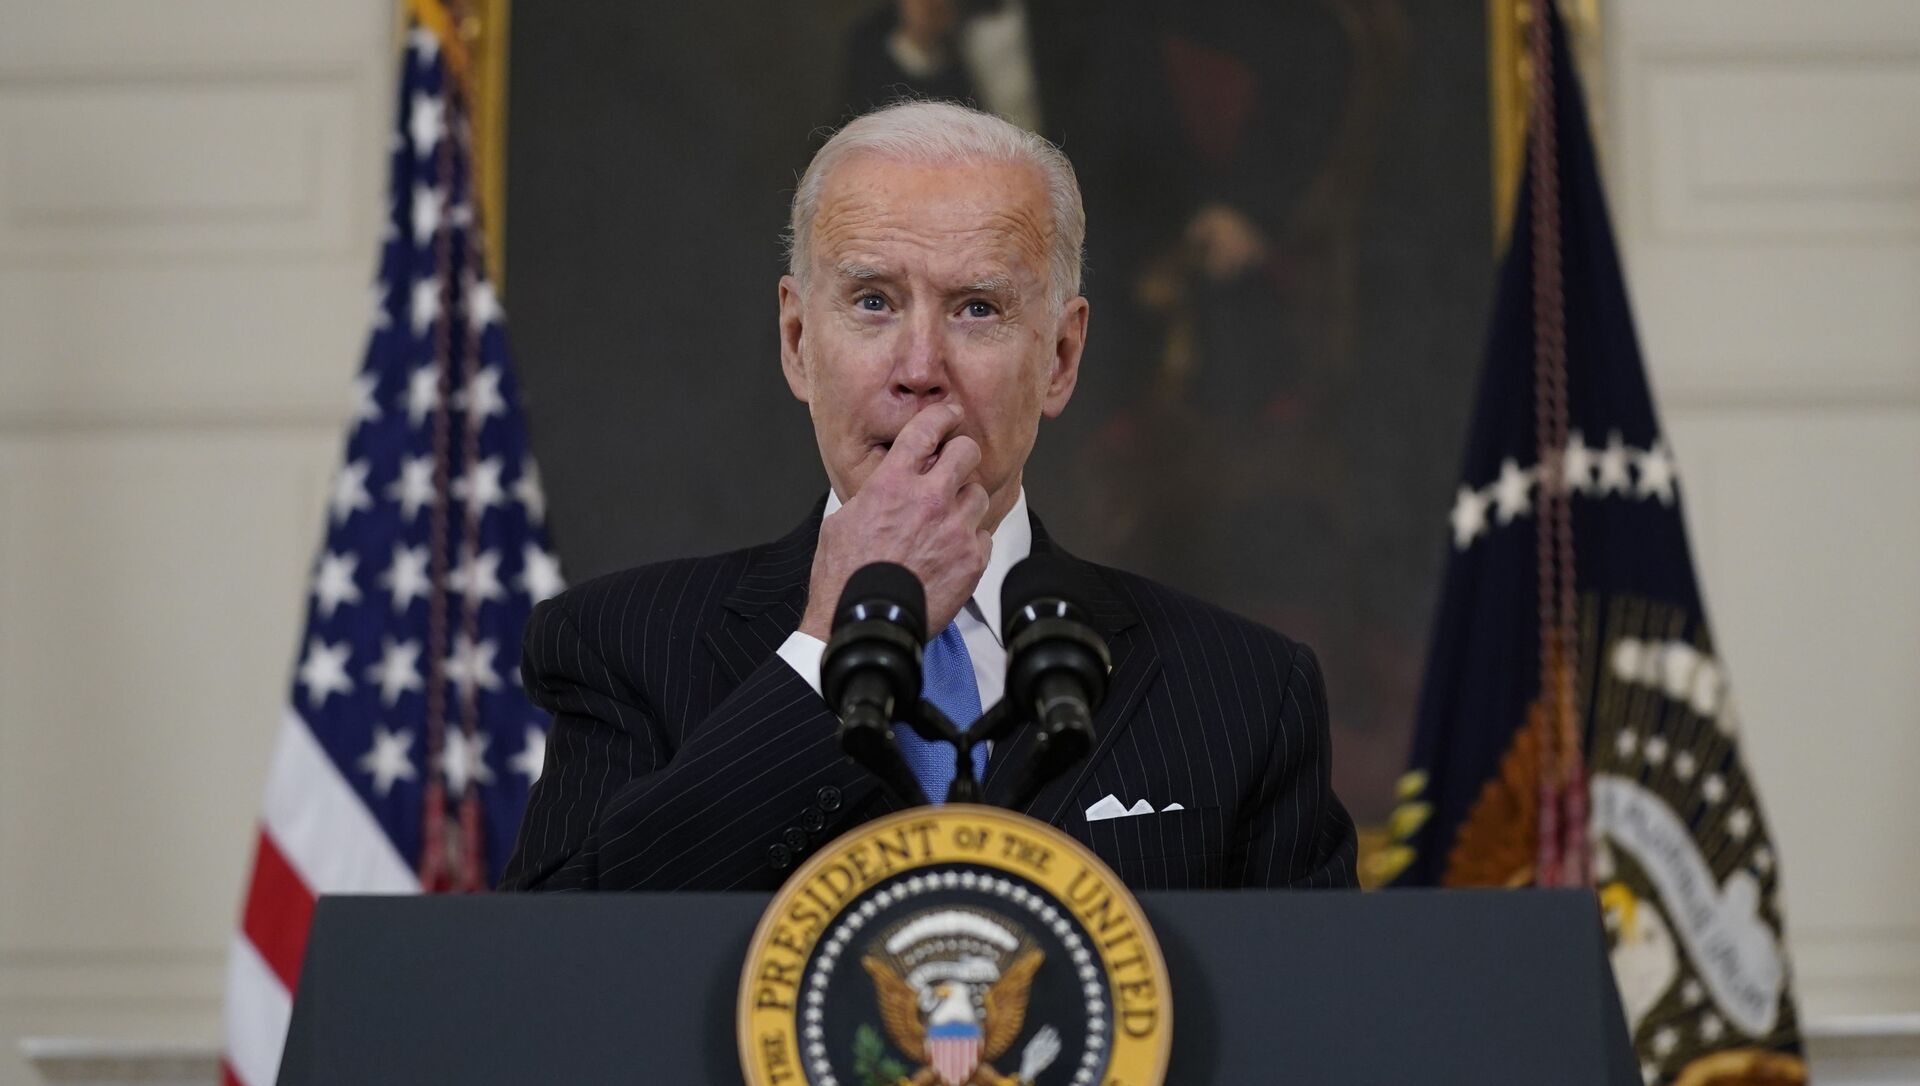 President Joe Biden speaks about efforts to combat COVID-19, in the State Dining Room of the White House, Tuesday, March 2, 2021, in Washington - Sputnik International, 1920, 04.03.2021